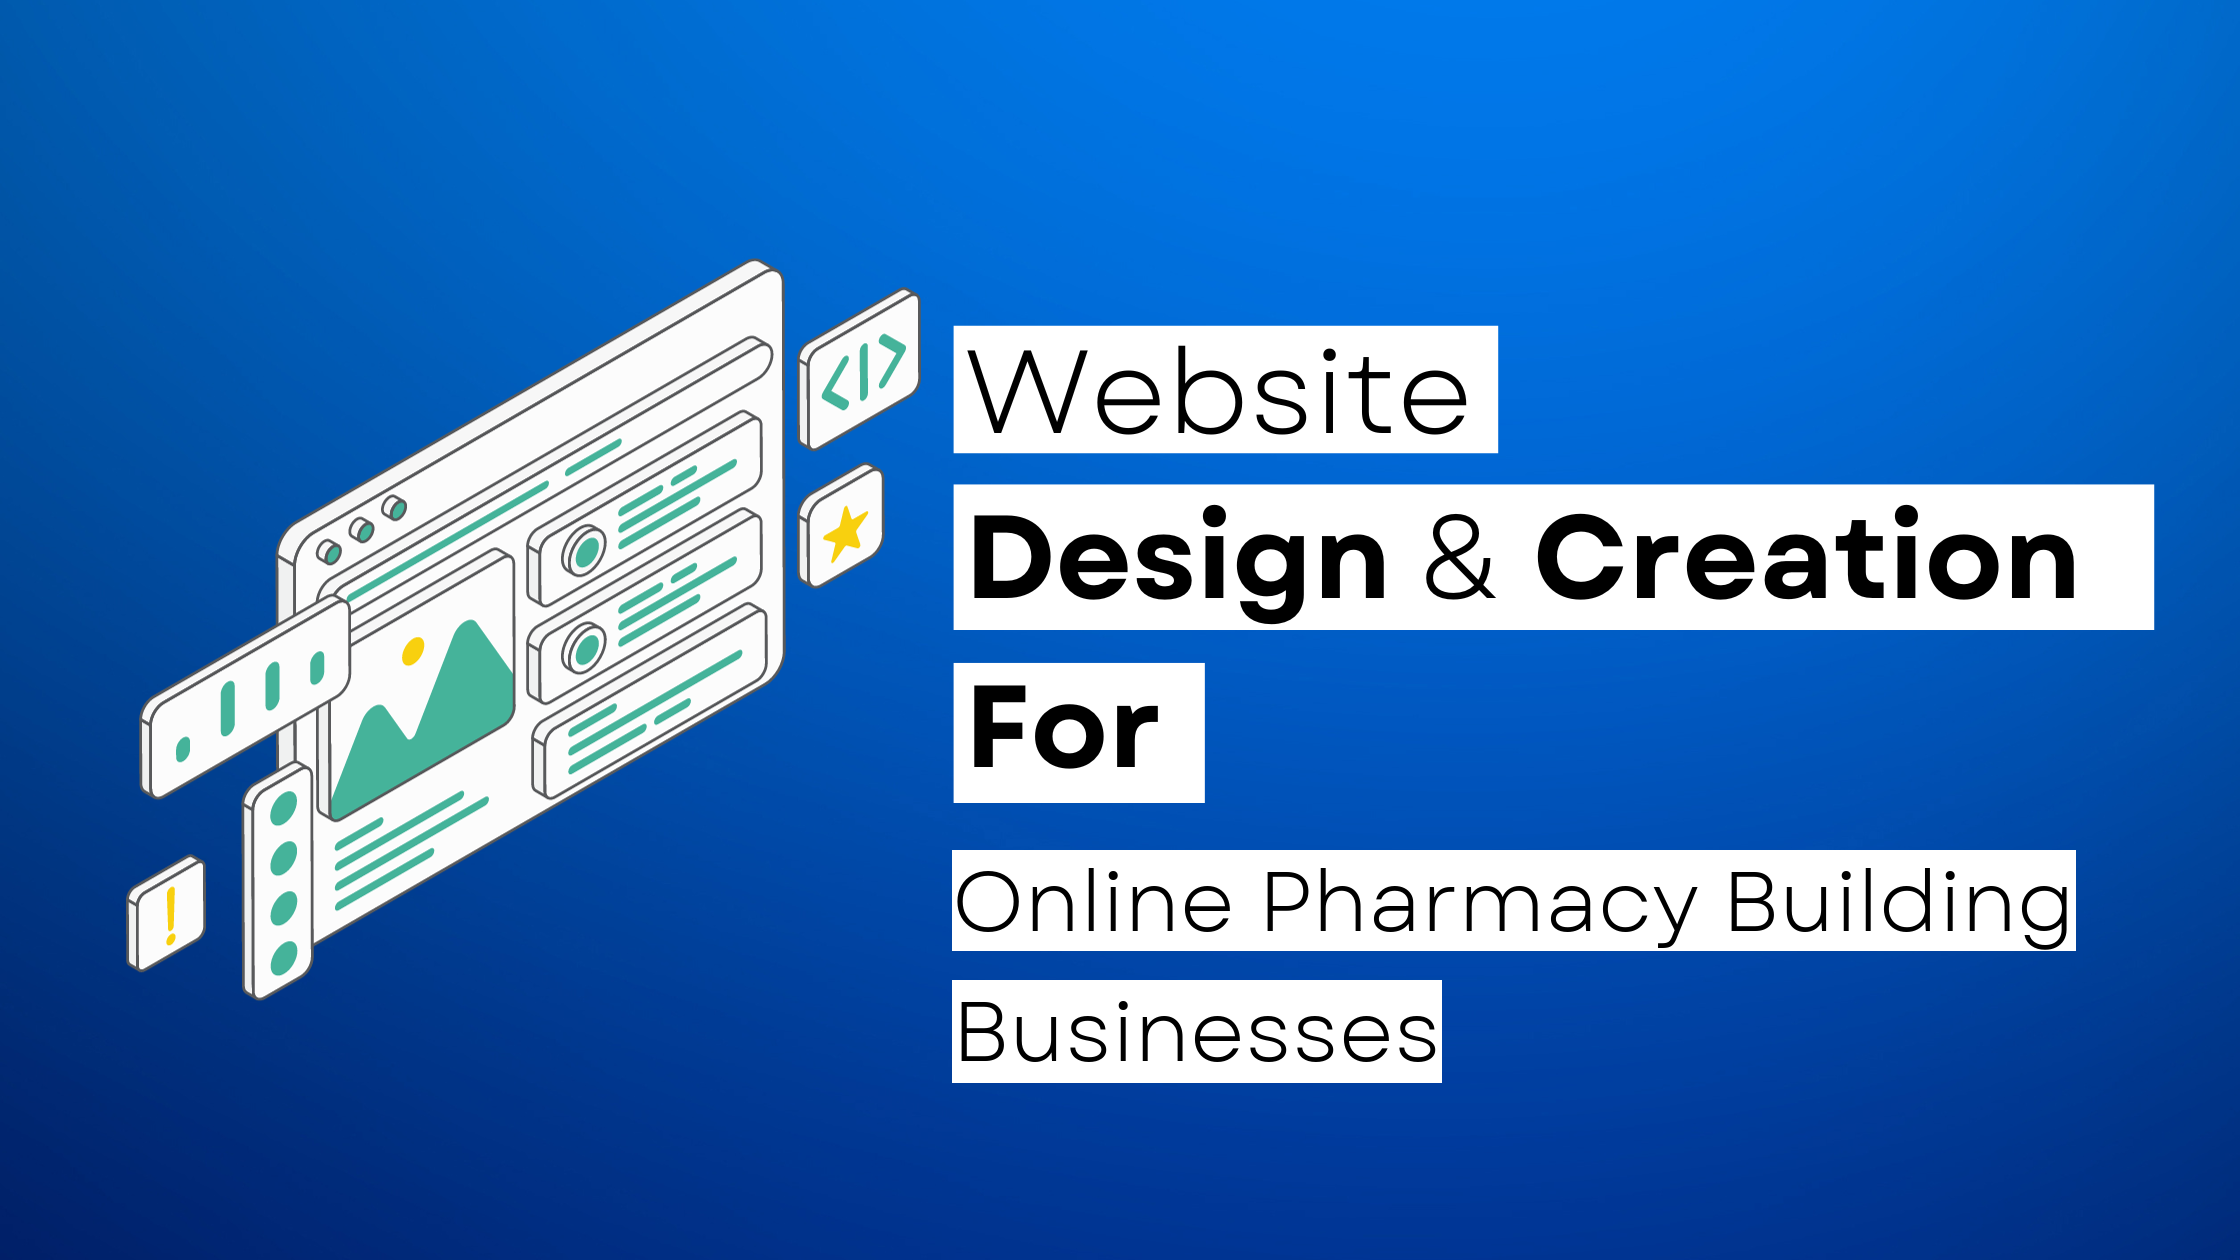 How to start a Online Pharmacy Building website